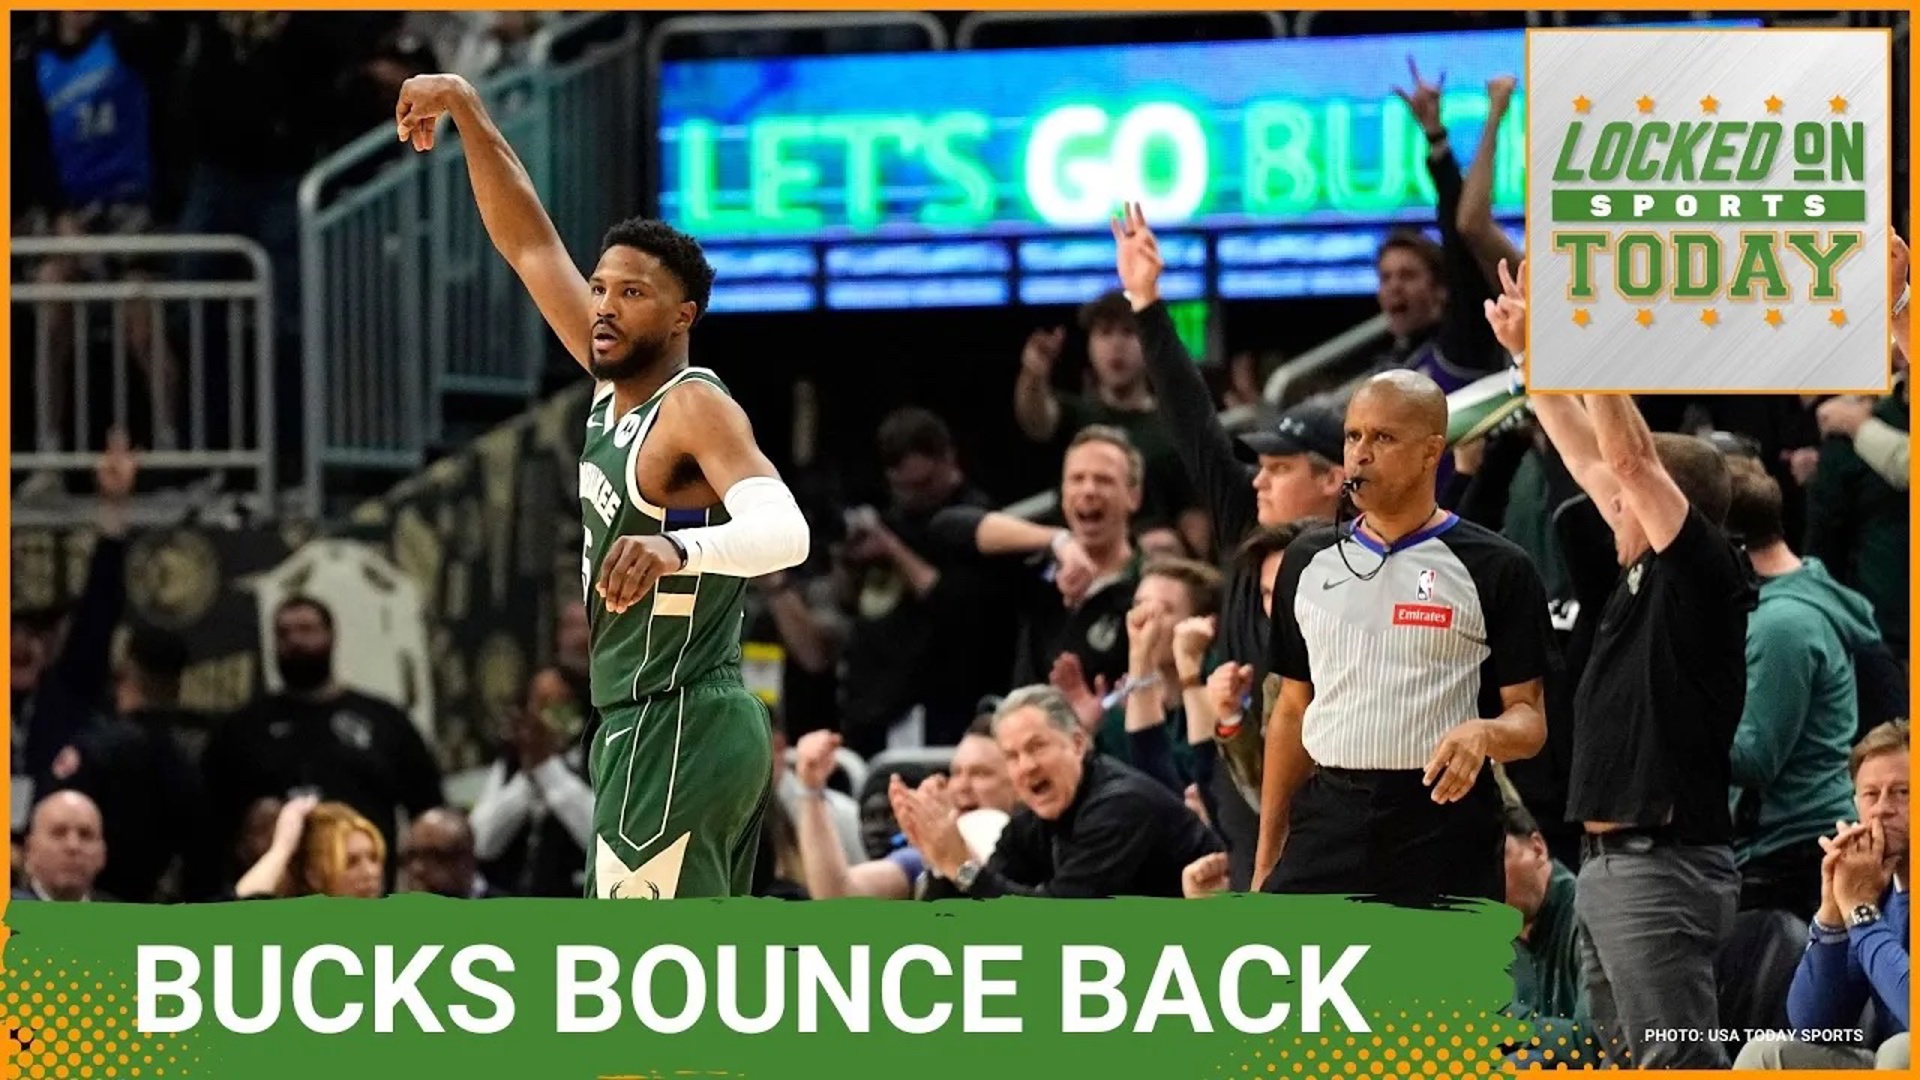 The Milwaukee Bucks bounce back, the Kentucky Derby is this weekend and the Cleveland Browns are in trouble.